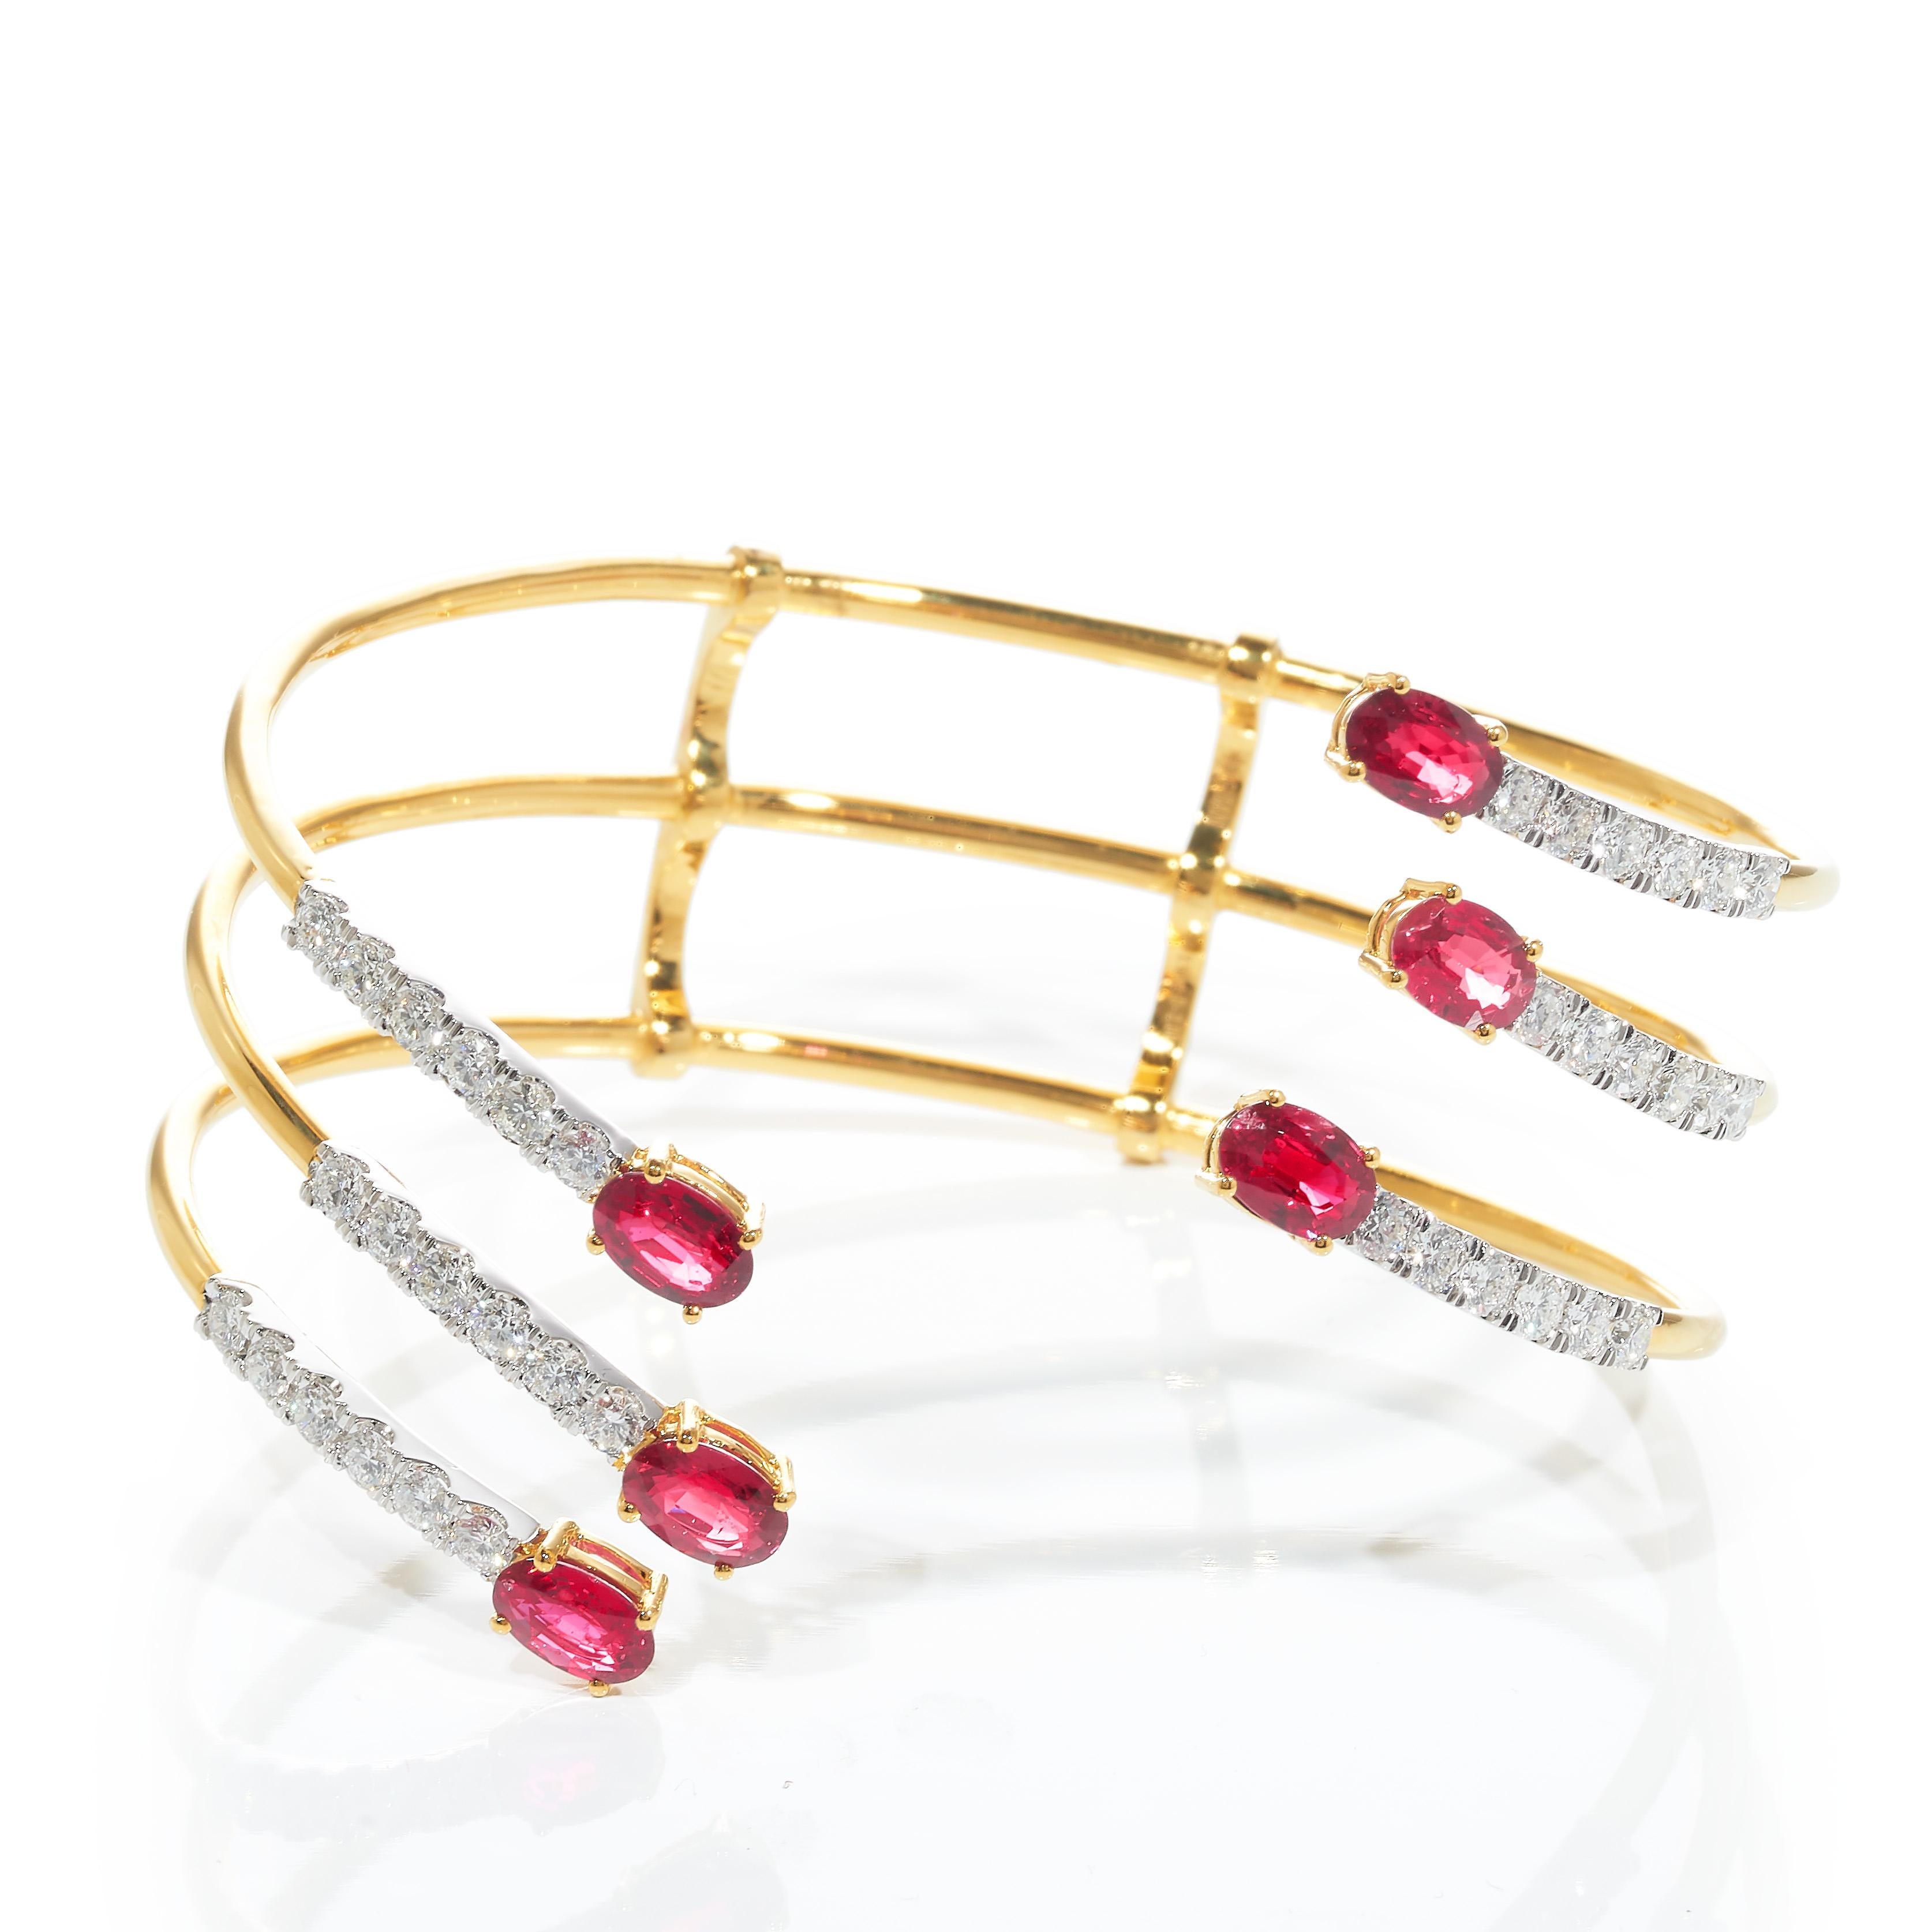 Contemporary 3-Prong Bracelet, 18 Karat Yellow and White Gold, Ruby, Diamonds Bangle For Sale